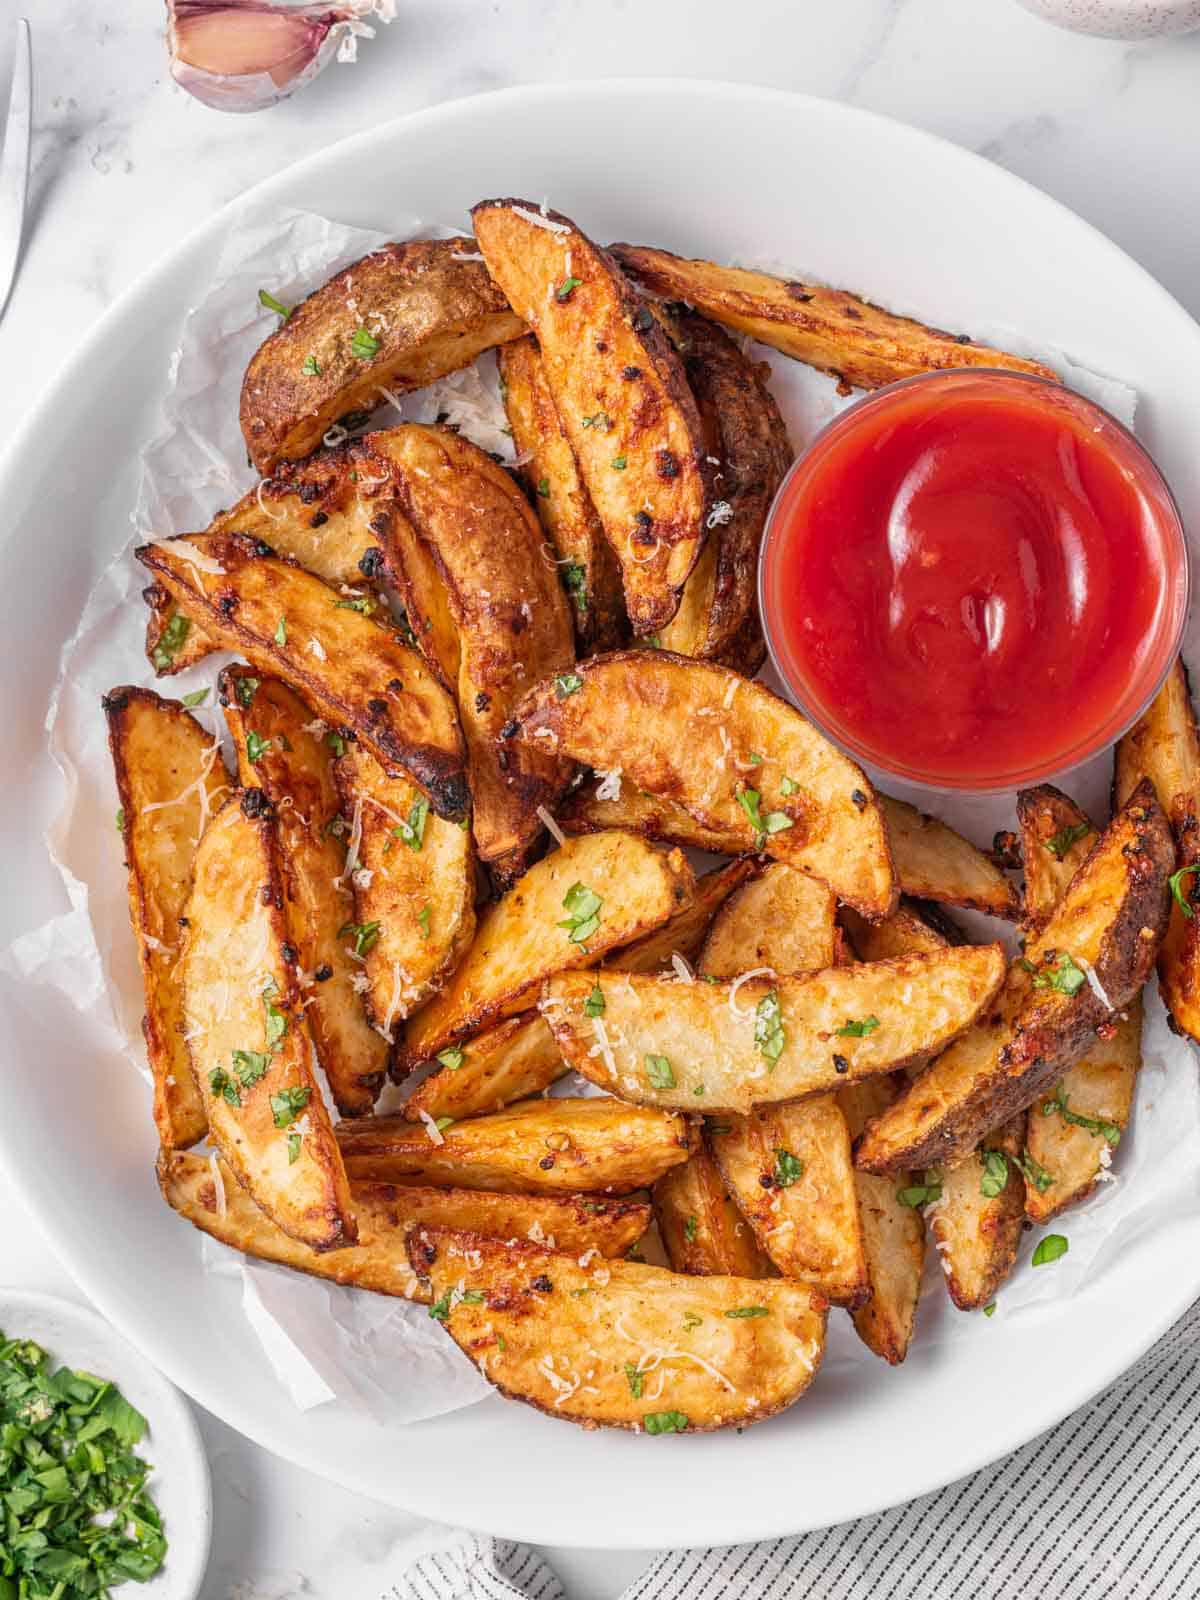 A plate of potato wedges air fryer with ketchup for dipping.